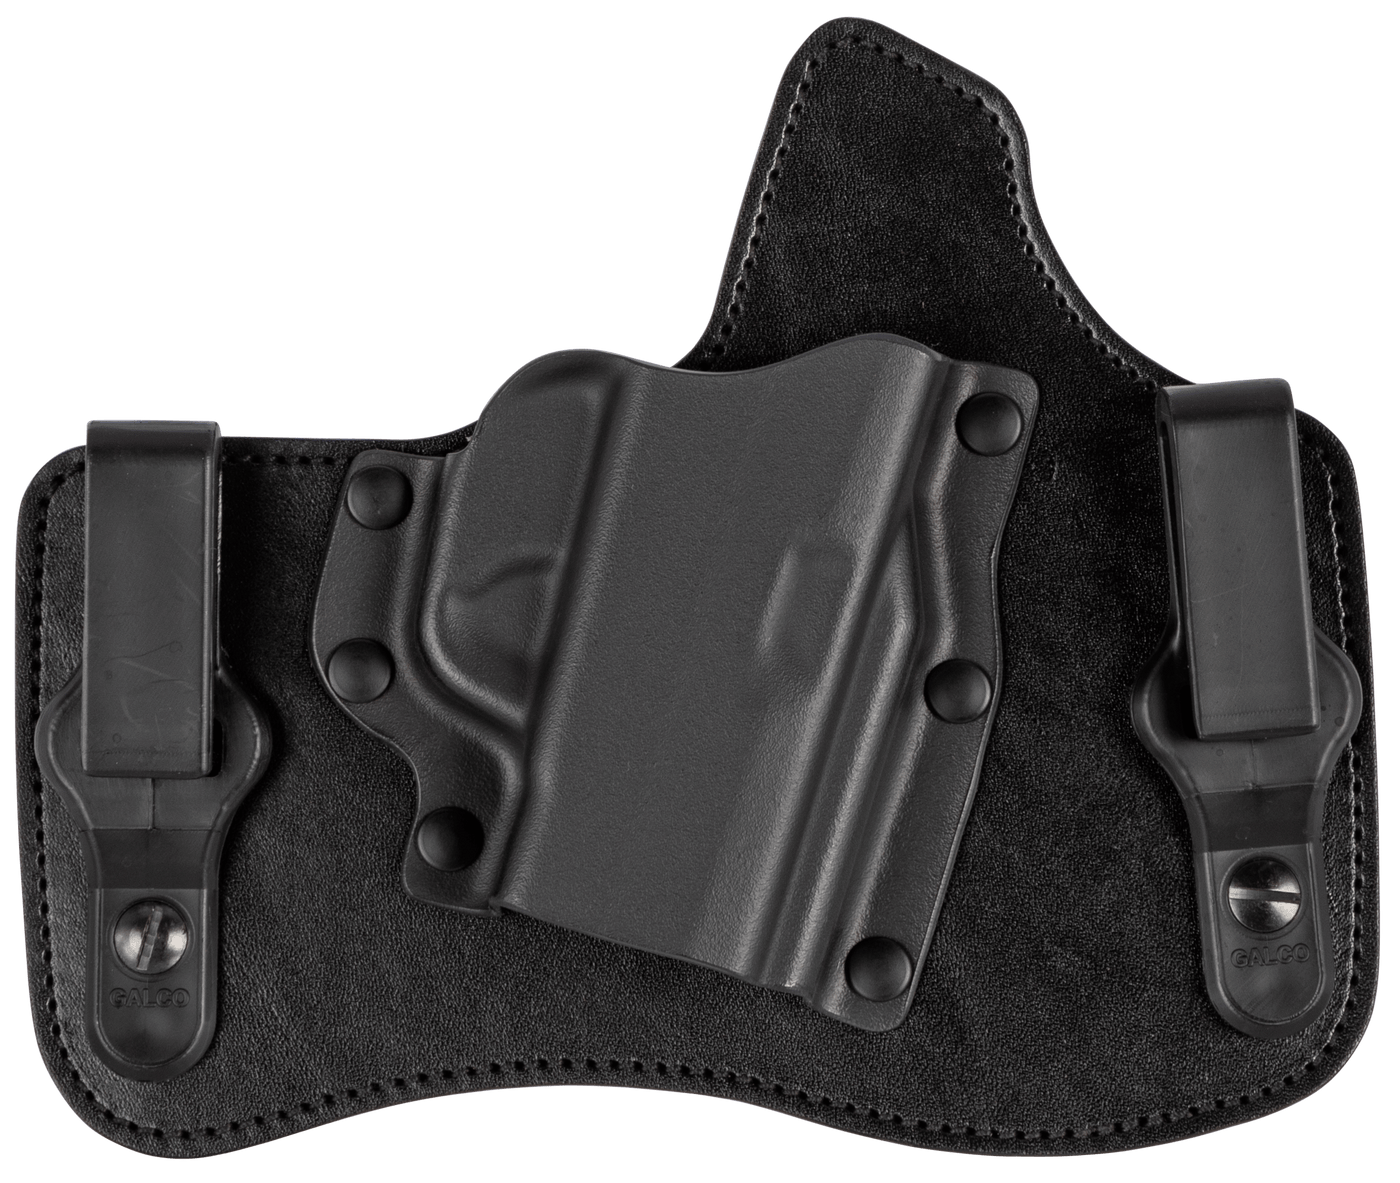 Galco Galco Kingtuk Iwb Clip Holster - Rh Hybrid Sig P365 Black Holsters And Related Items